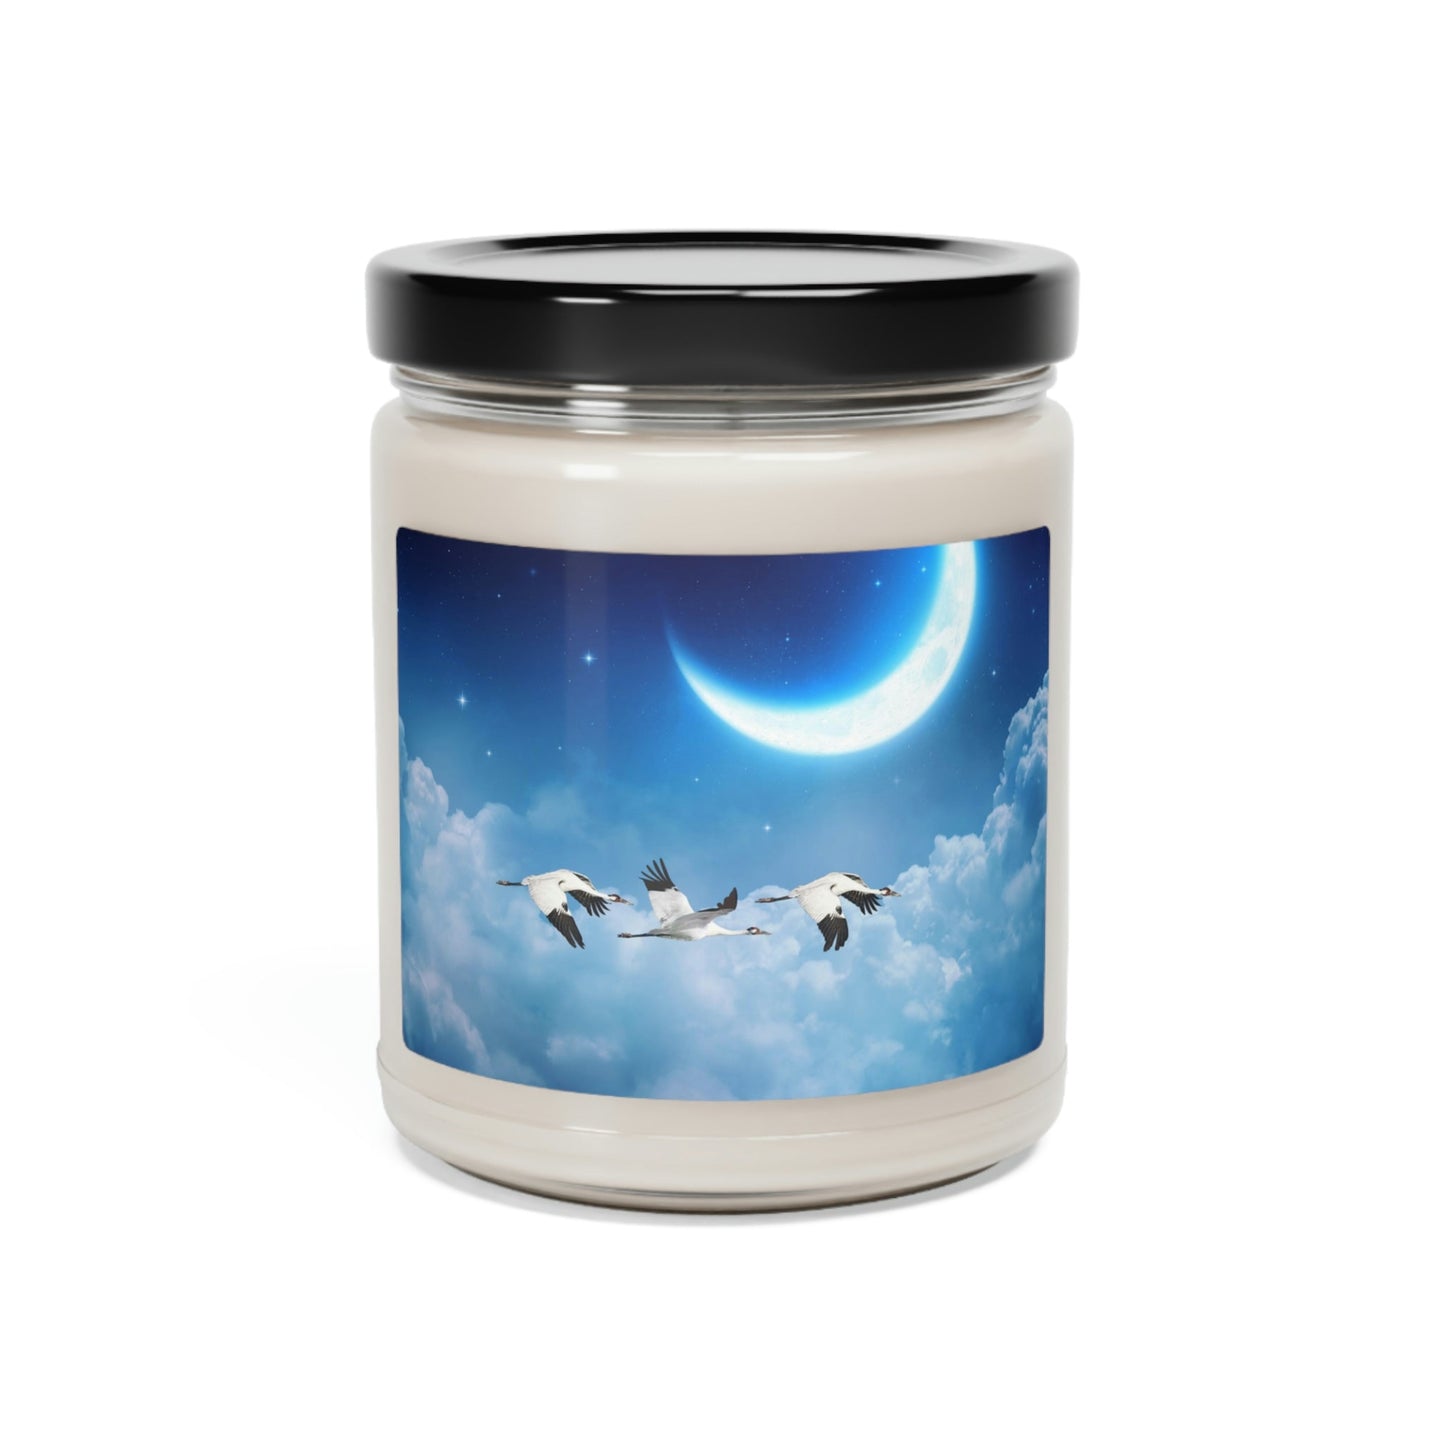 Whooping Crane Midnight Run Scented Soy Candle, 9oz